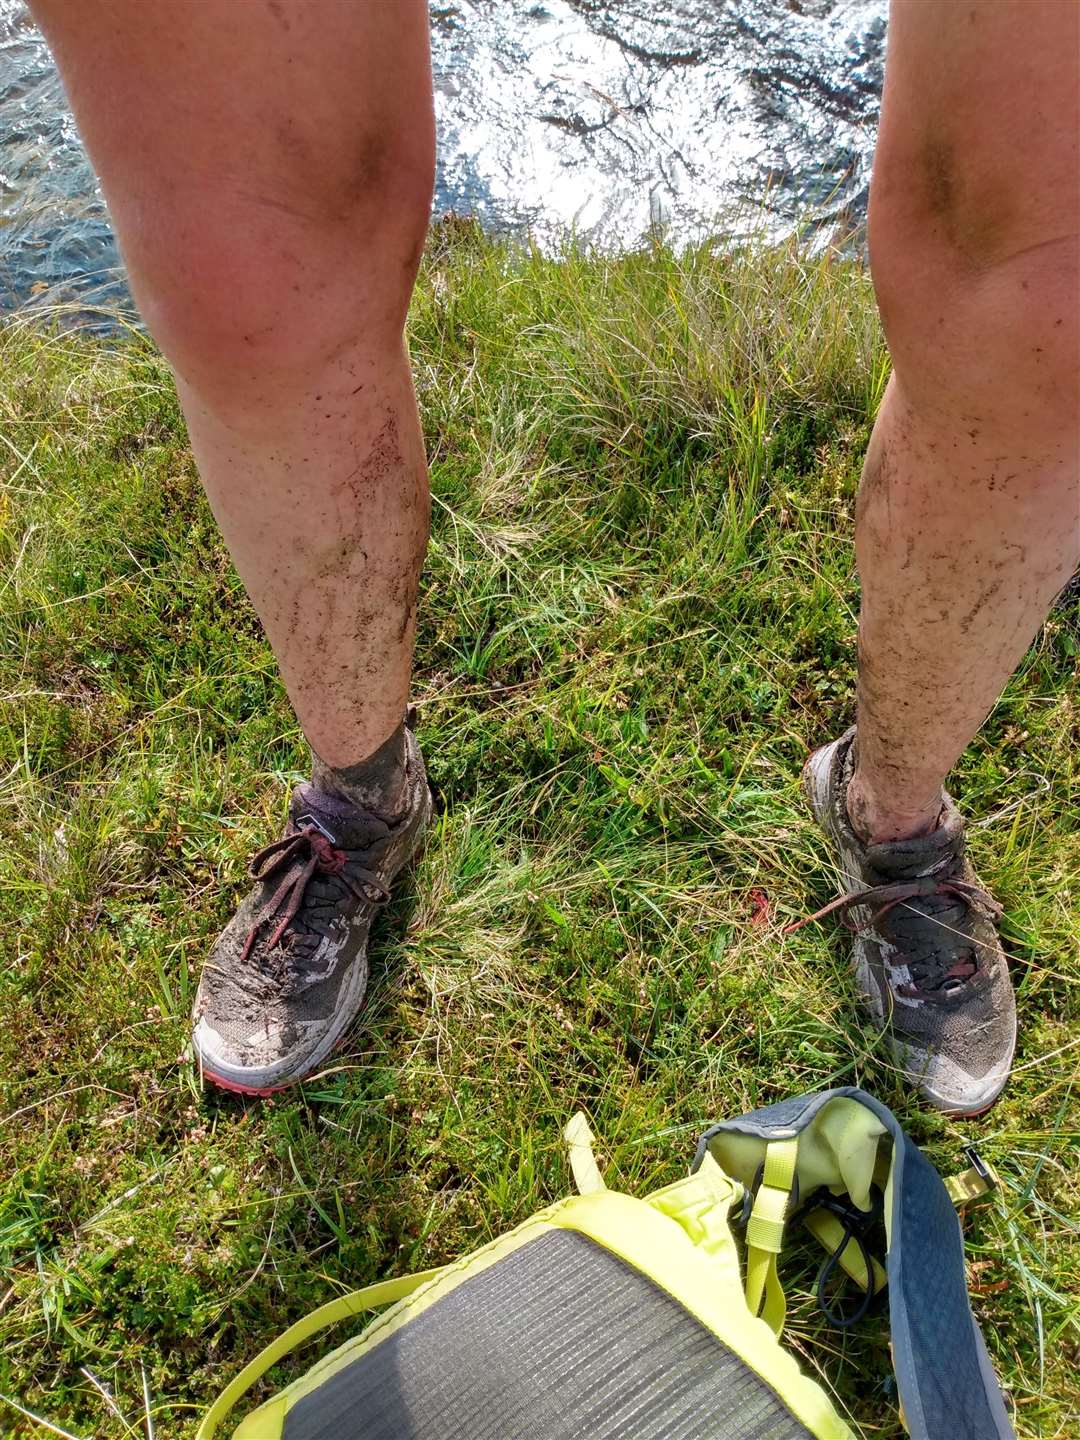 Muddy shoes!